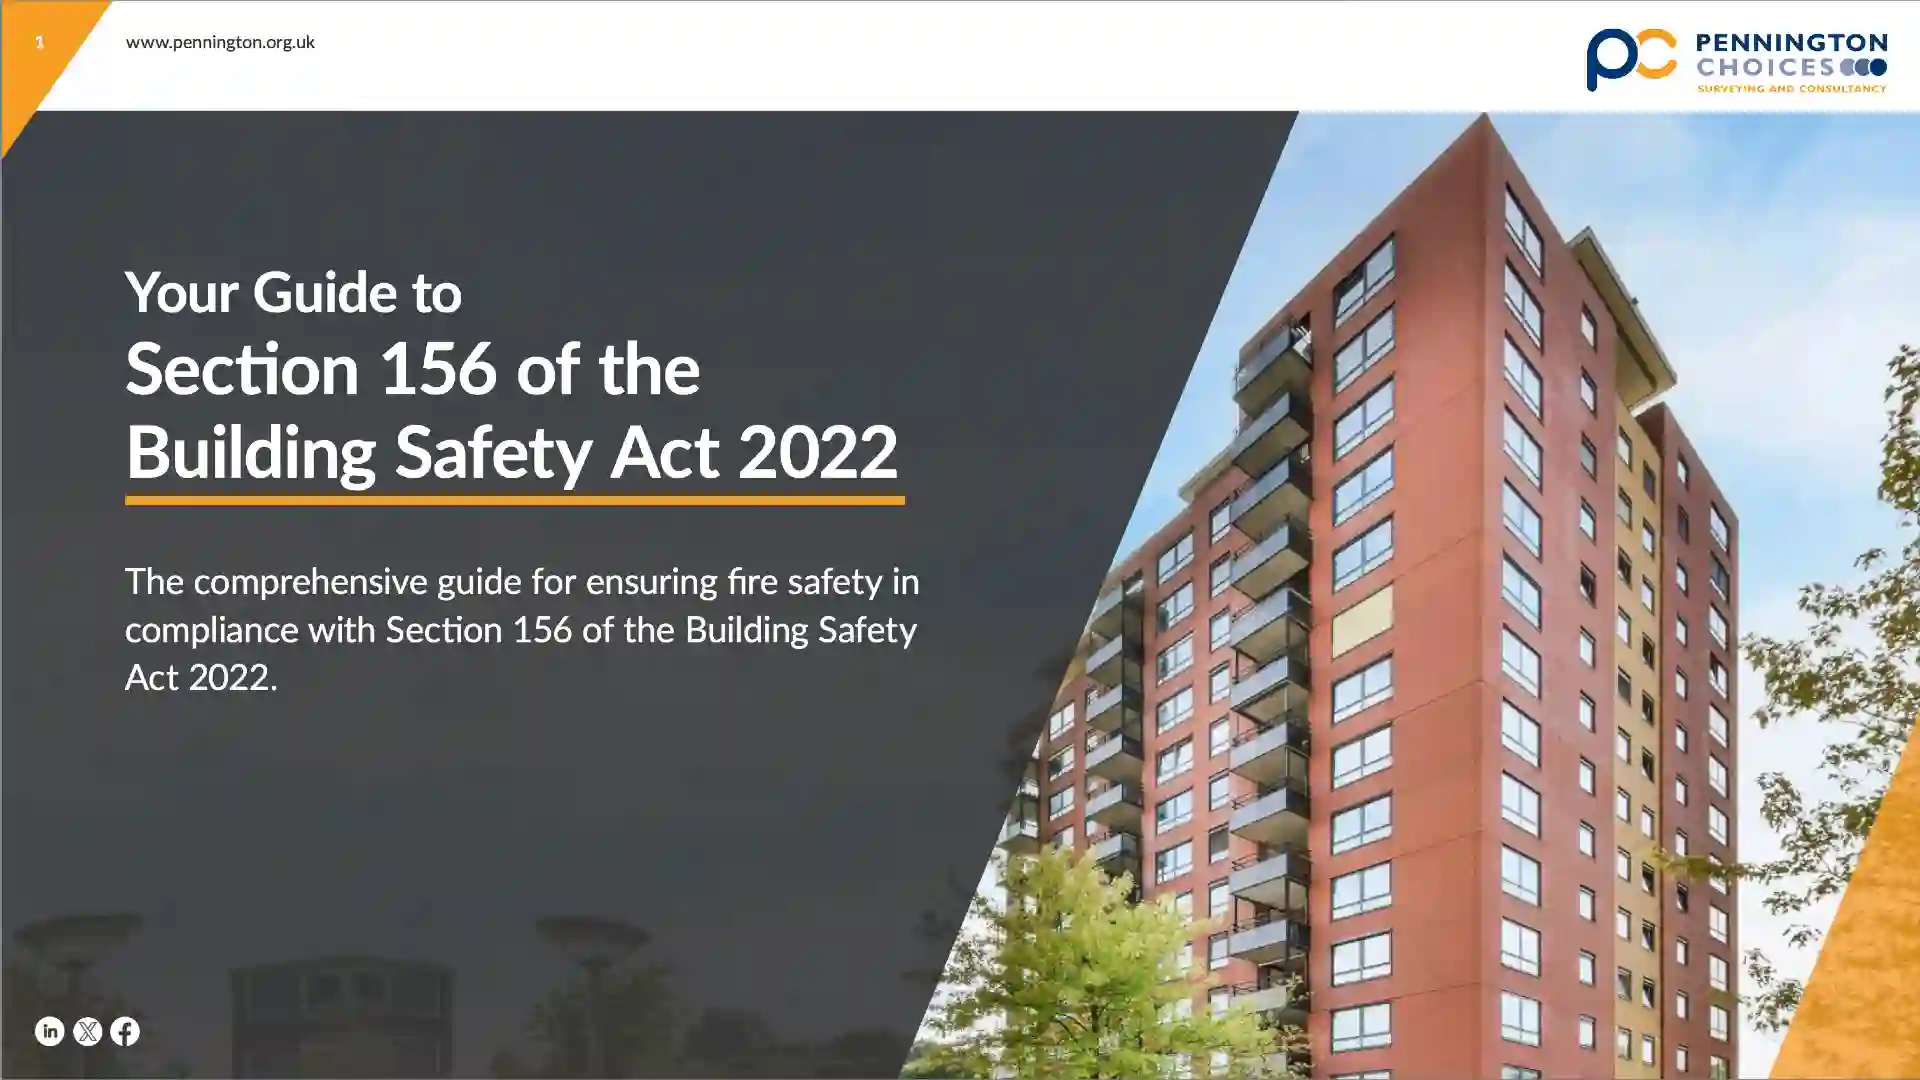 Cover image - Your guide to Section 156 of the Building Safety Act 2022 - Pennington Choices